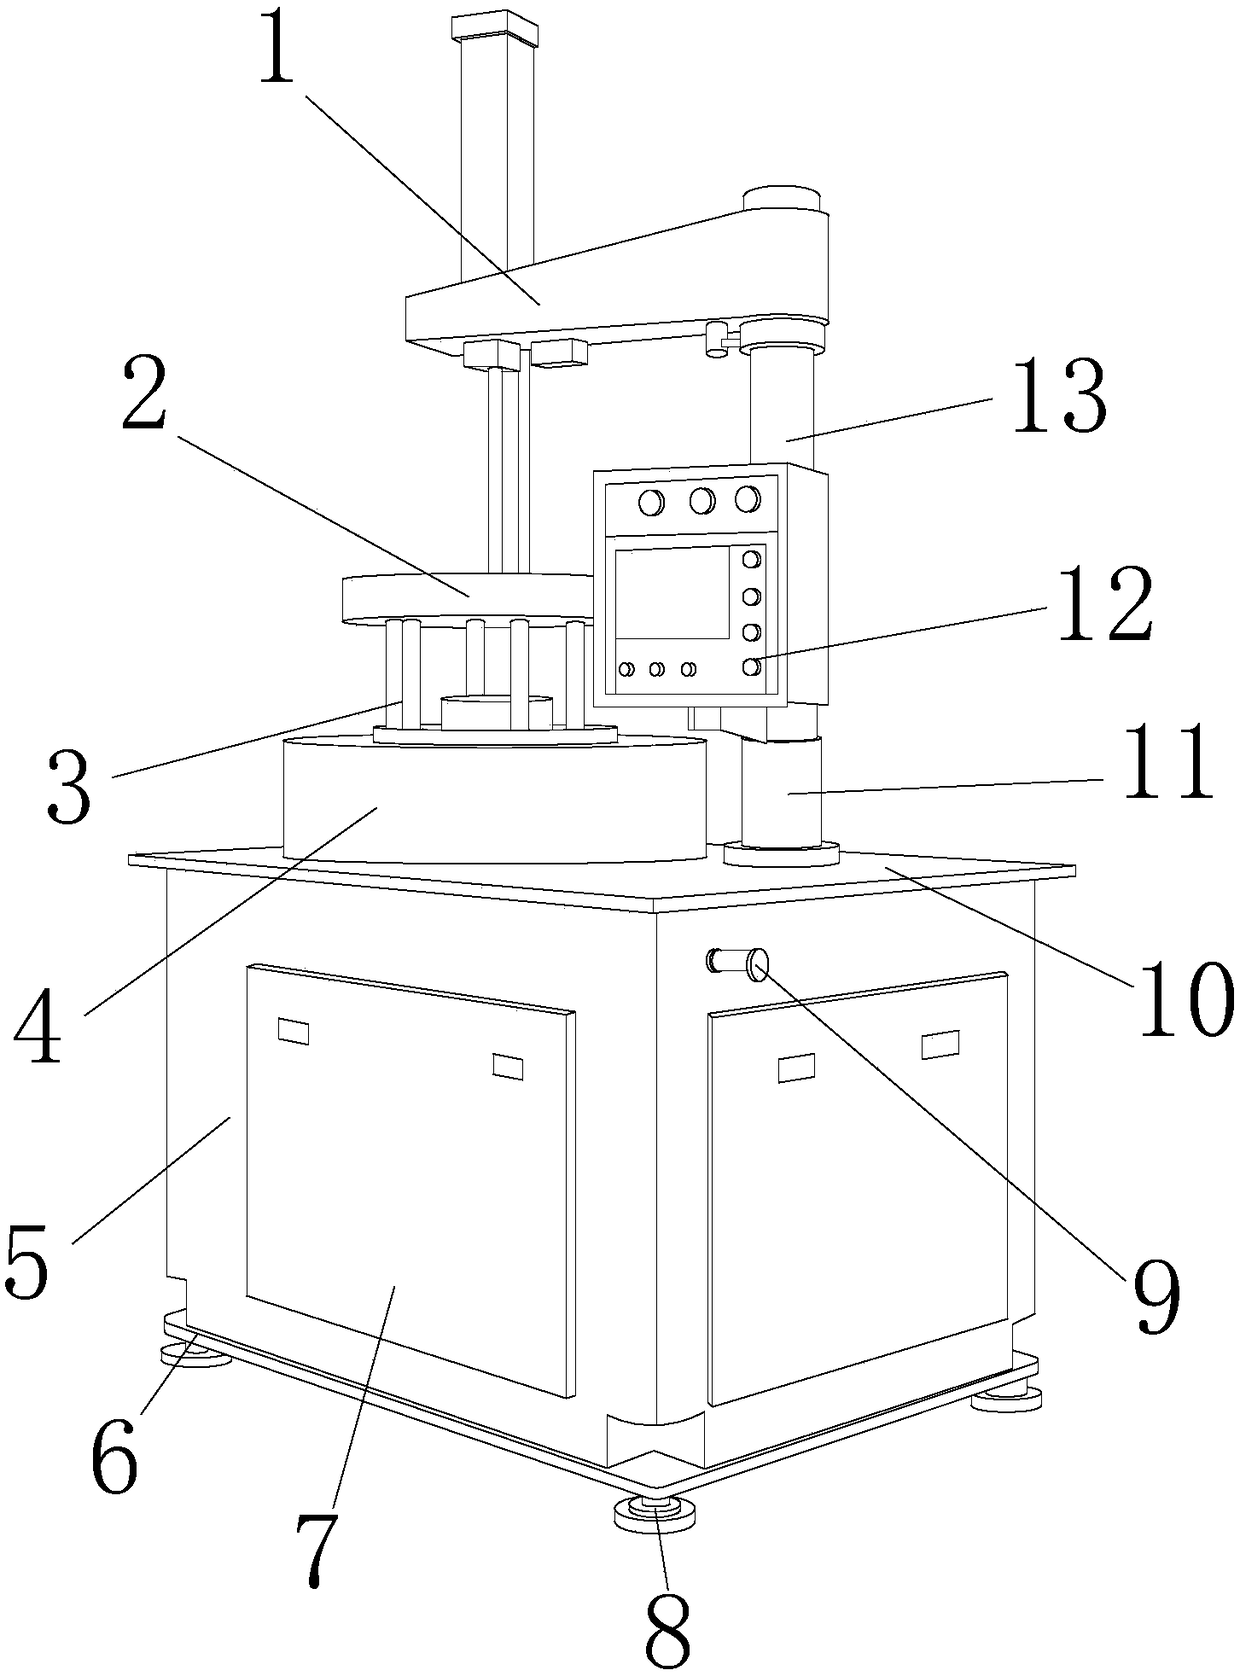 Wafer polishing system for reducing defects in manufacturing of semiconductor devices